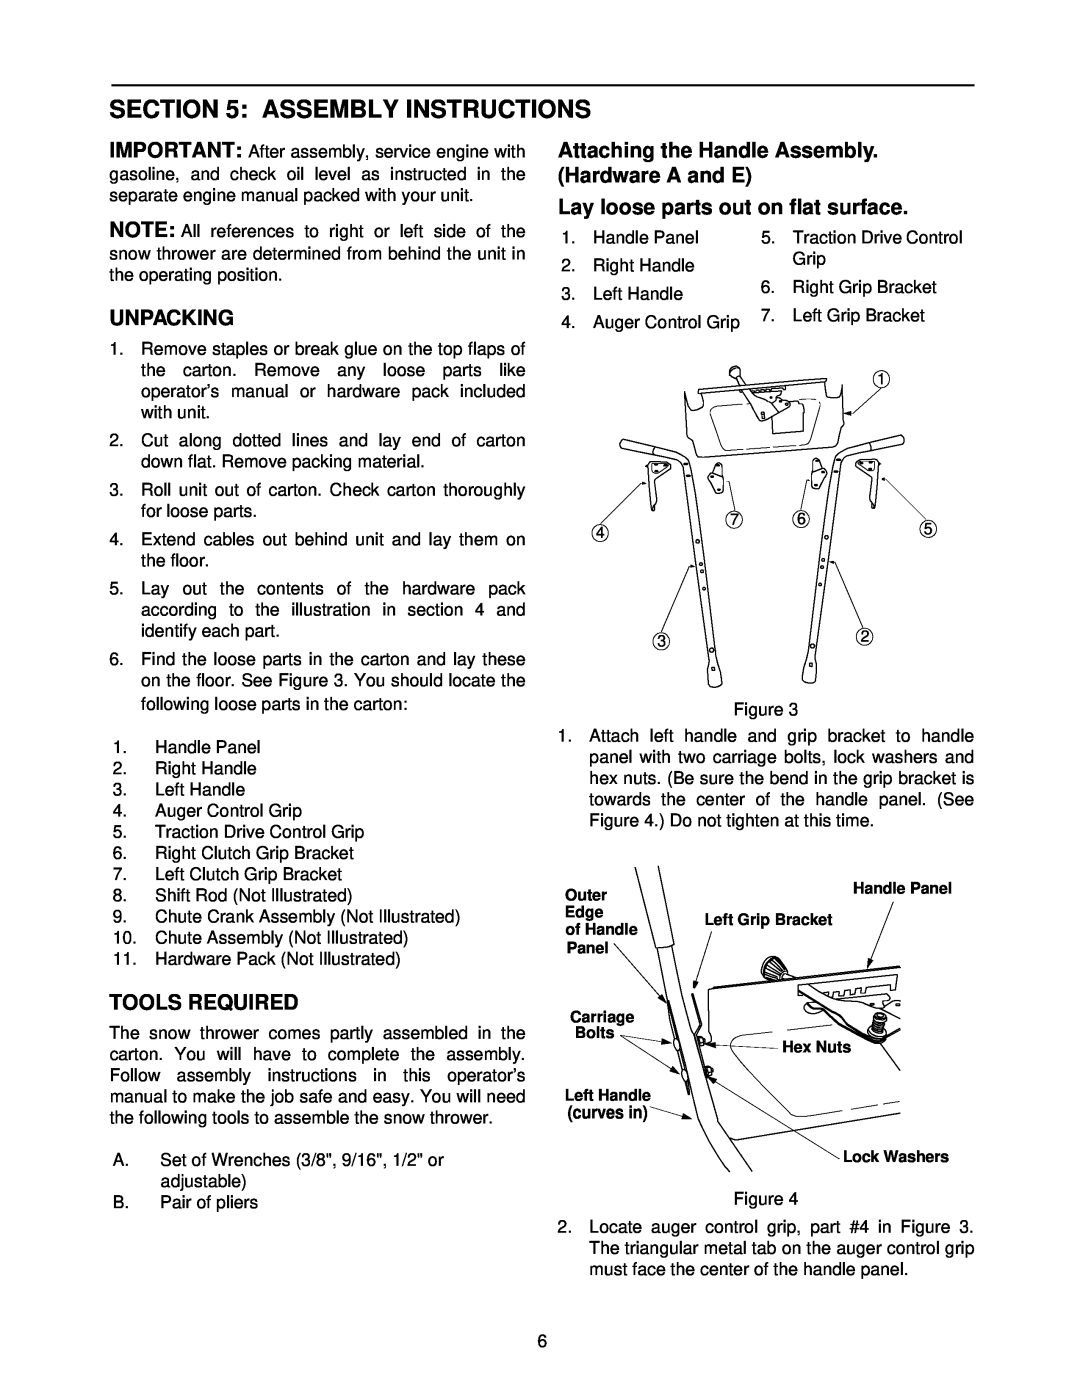 MTD E6A4E Assembly Instructions, Unpacking, Attaching the Handle Assembly. Hardware A and E, Tools Required, curves in 